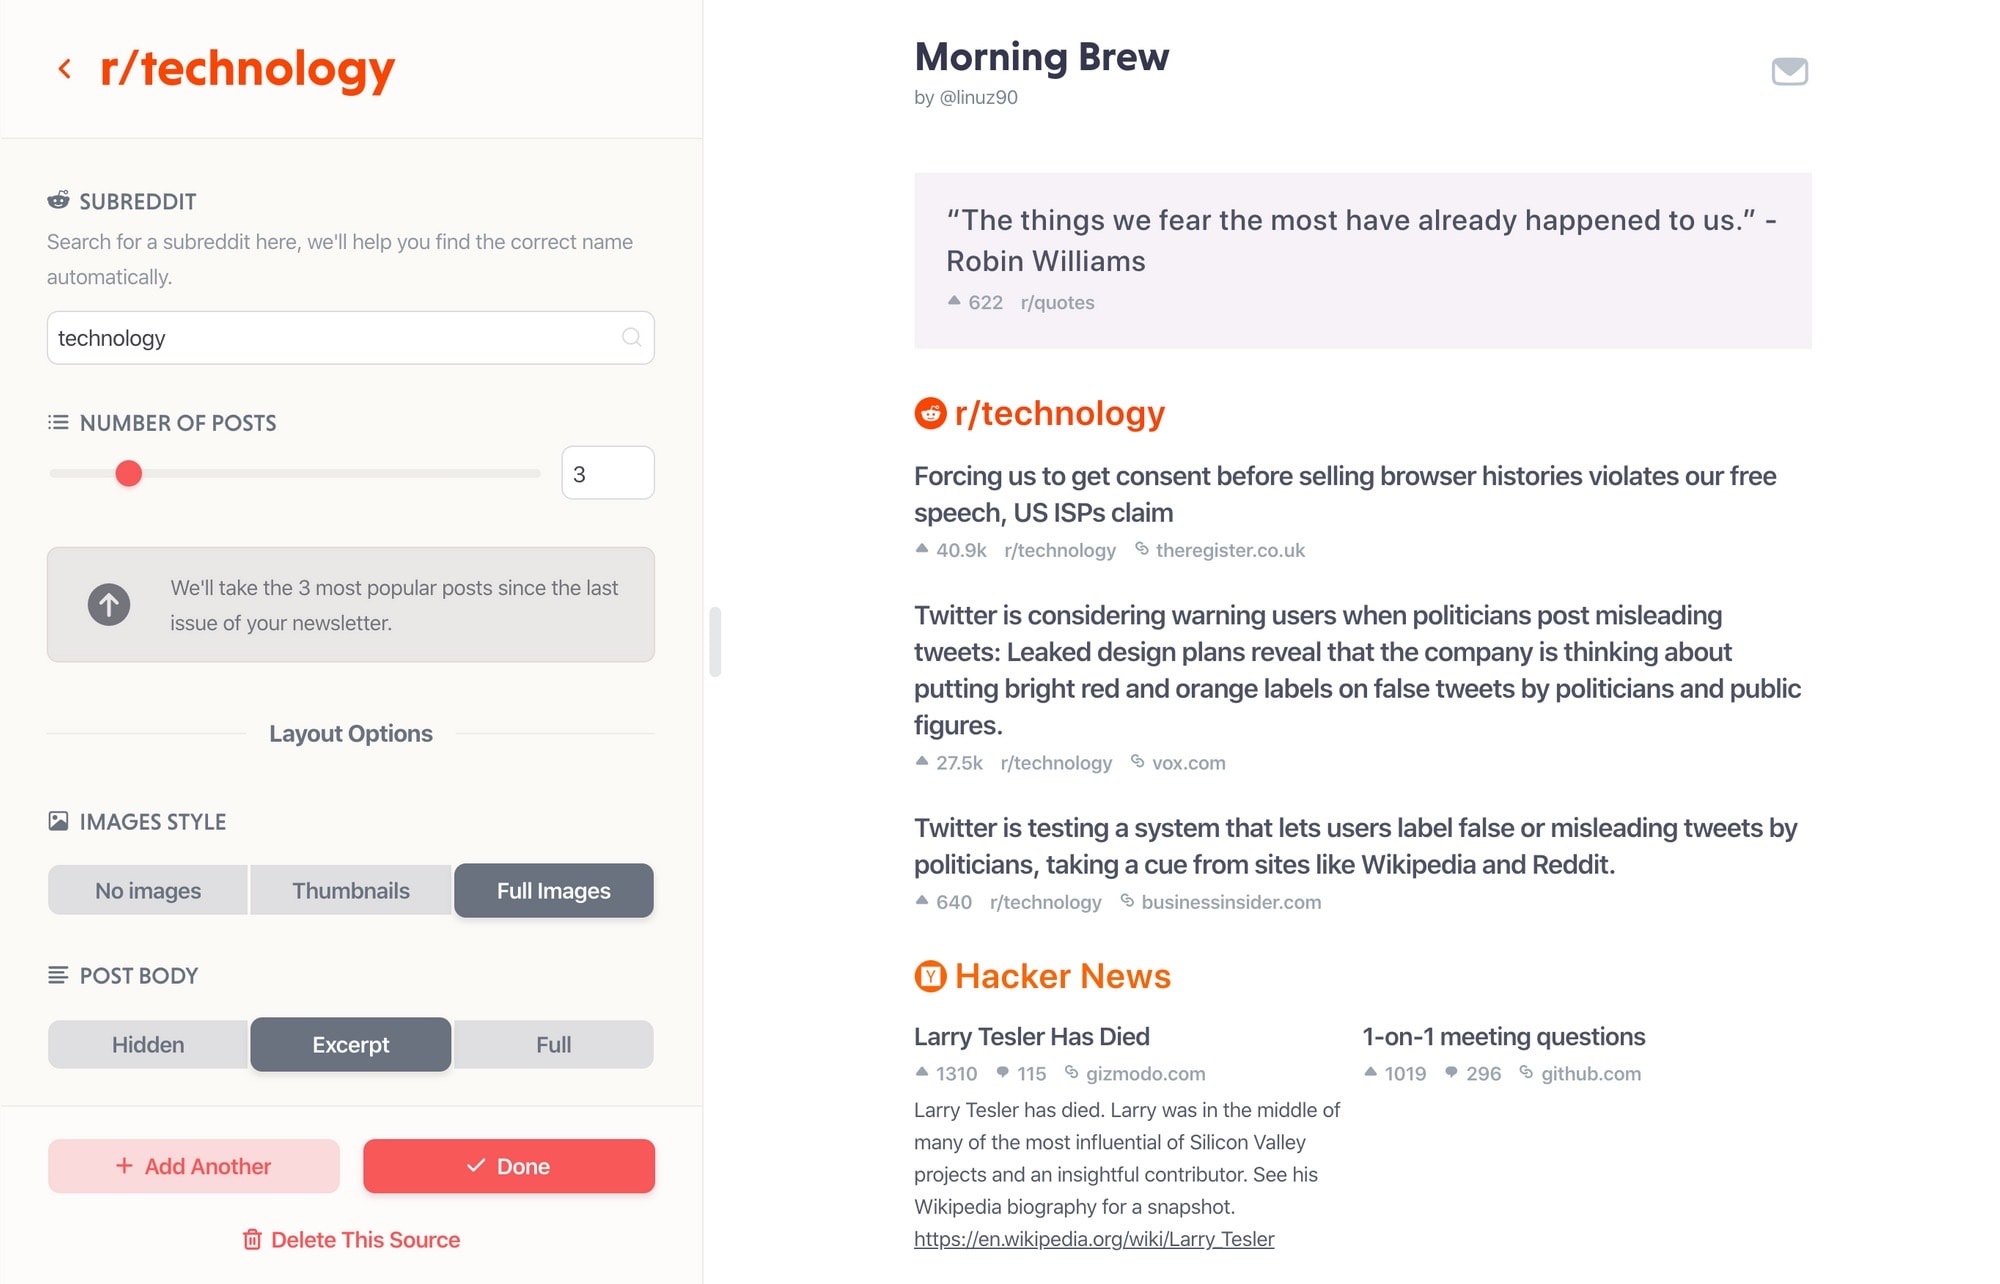 Mailbrew makes it easy to create customizable email newsletters out of various infomation streams.